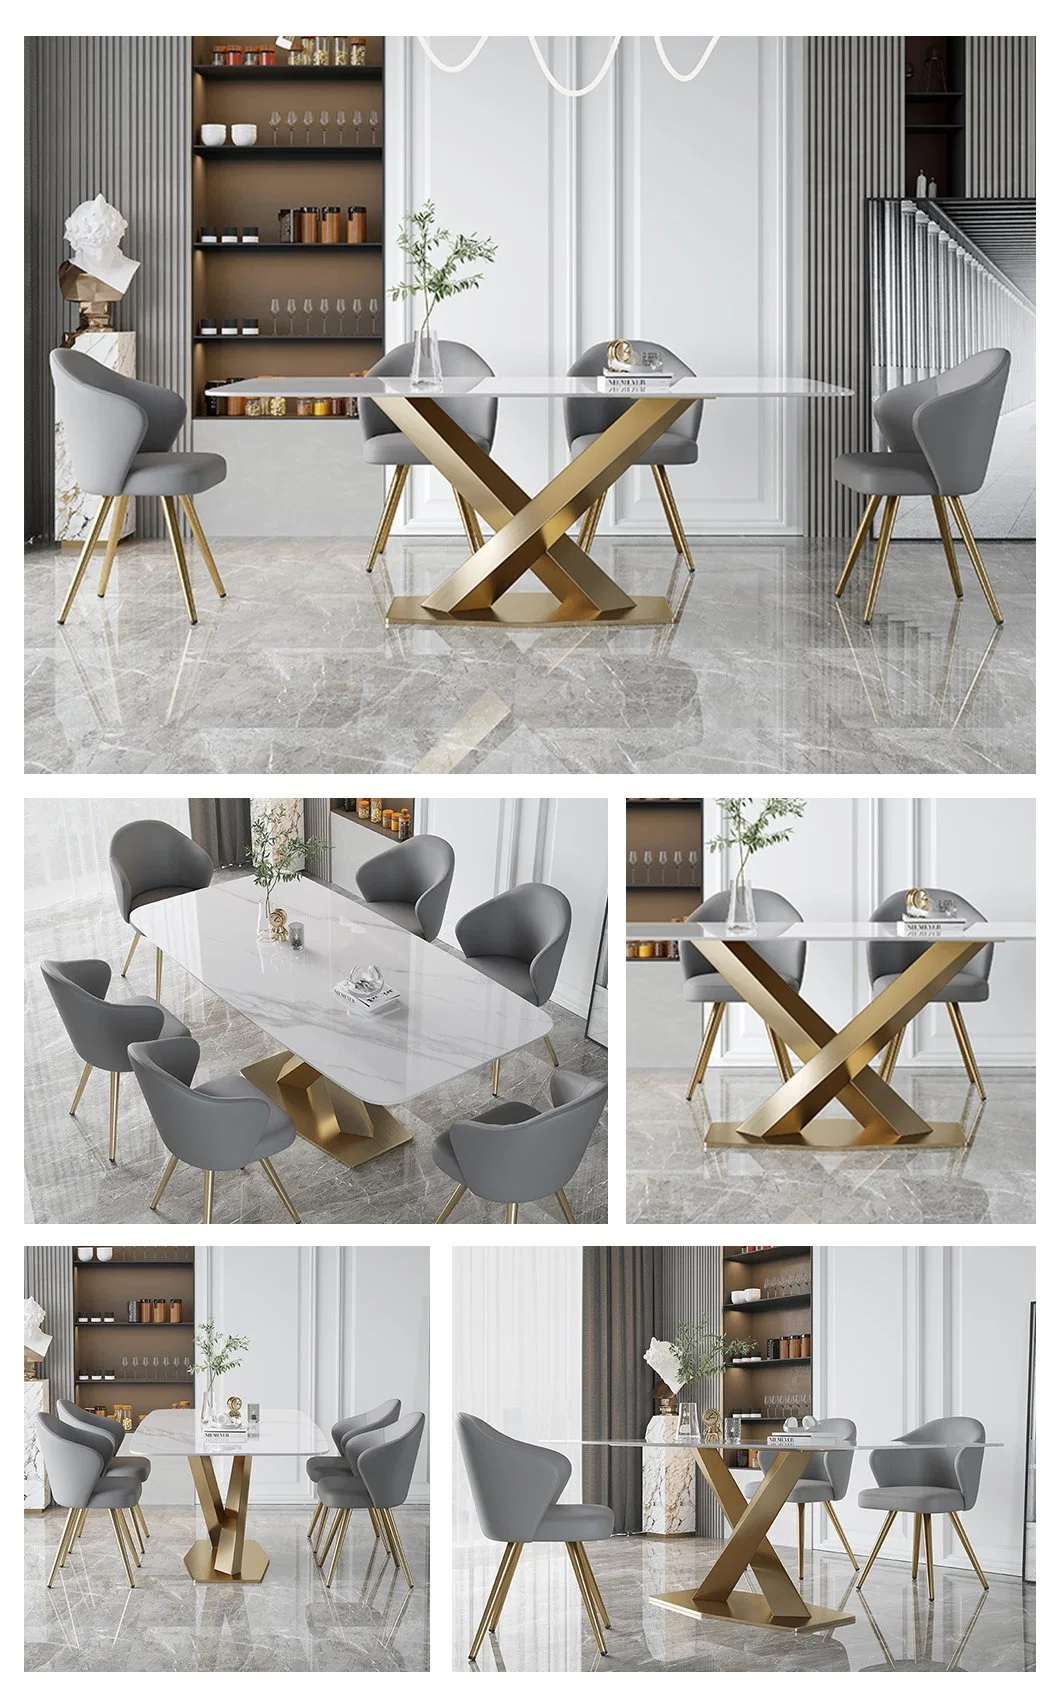 Luxury Antique Italian Modern Rectangle Stone Marble Dining Table Set 6 Chairs Home Hotel Restaurant Metal Leg Dining Room Furniture